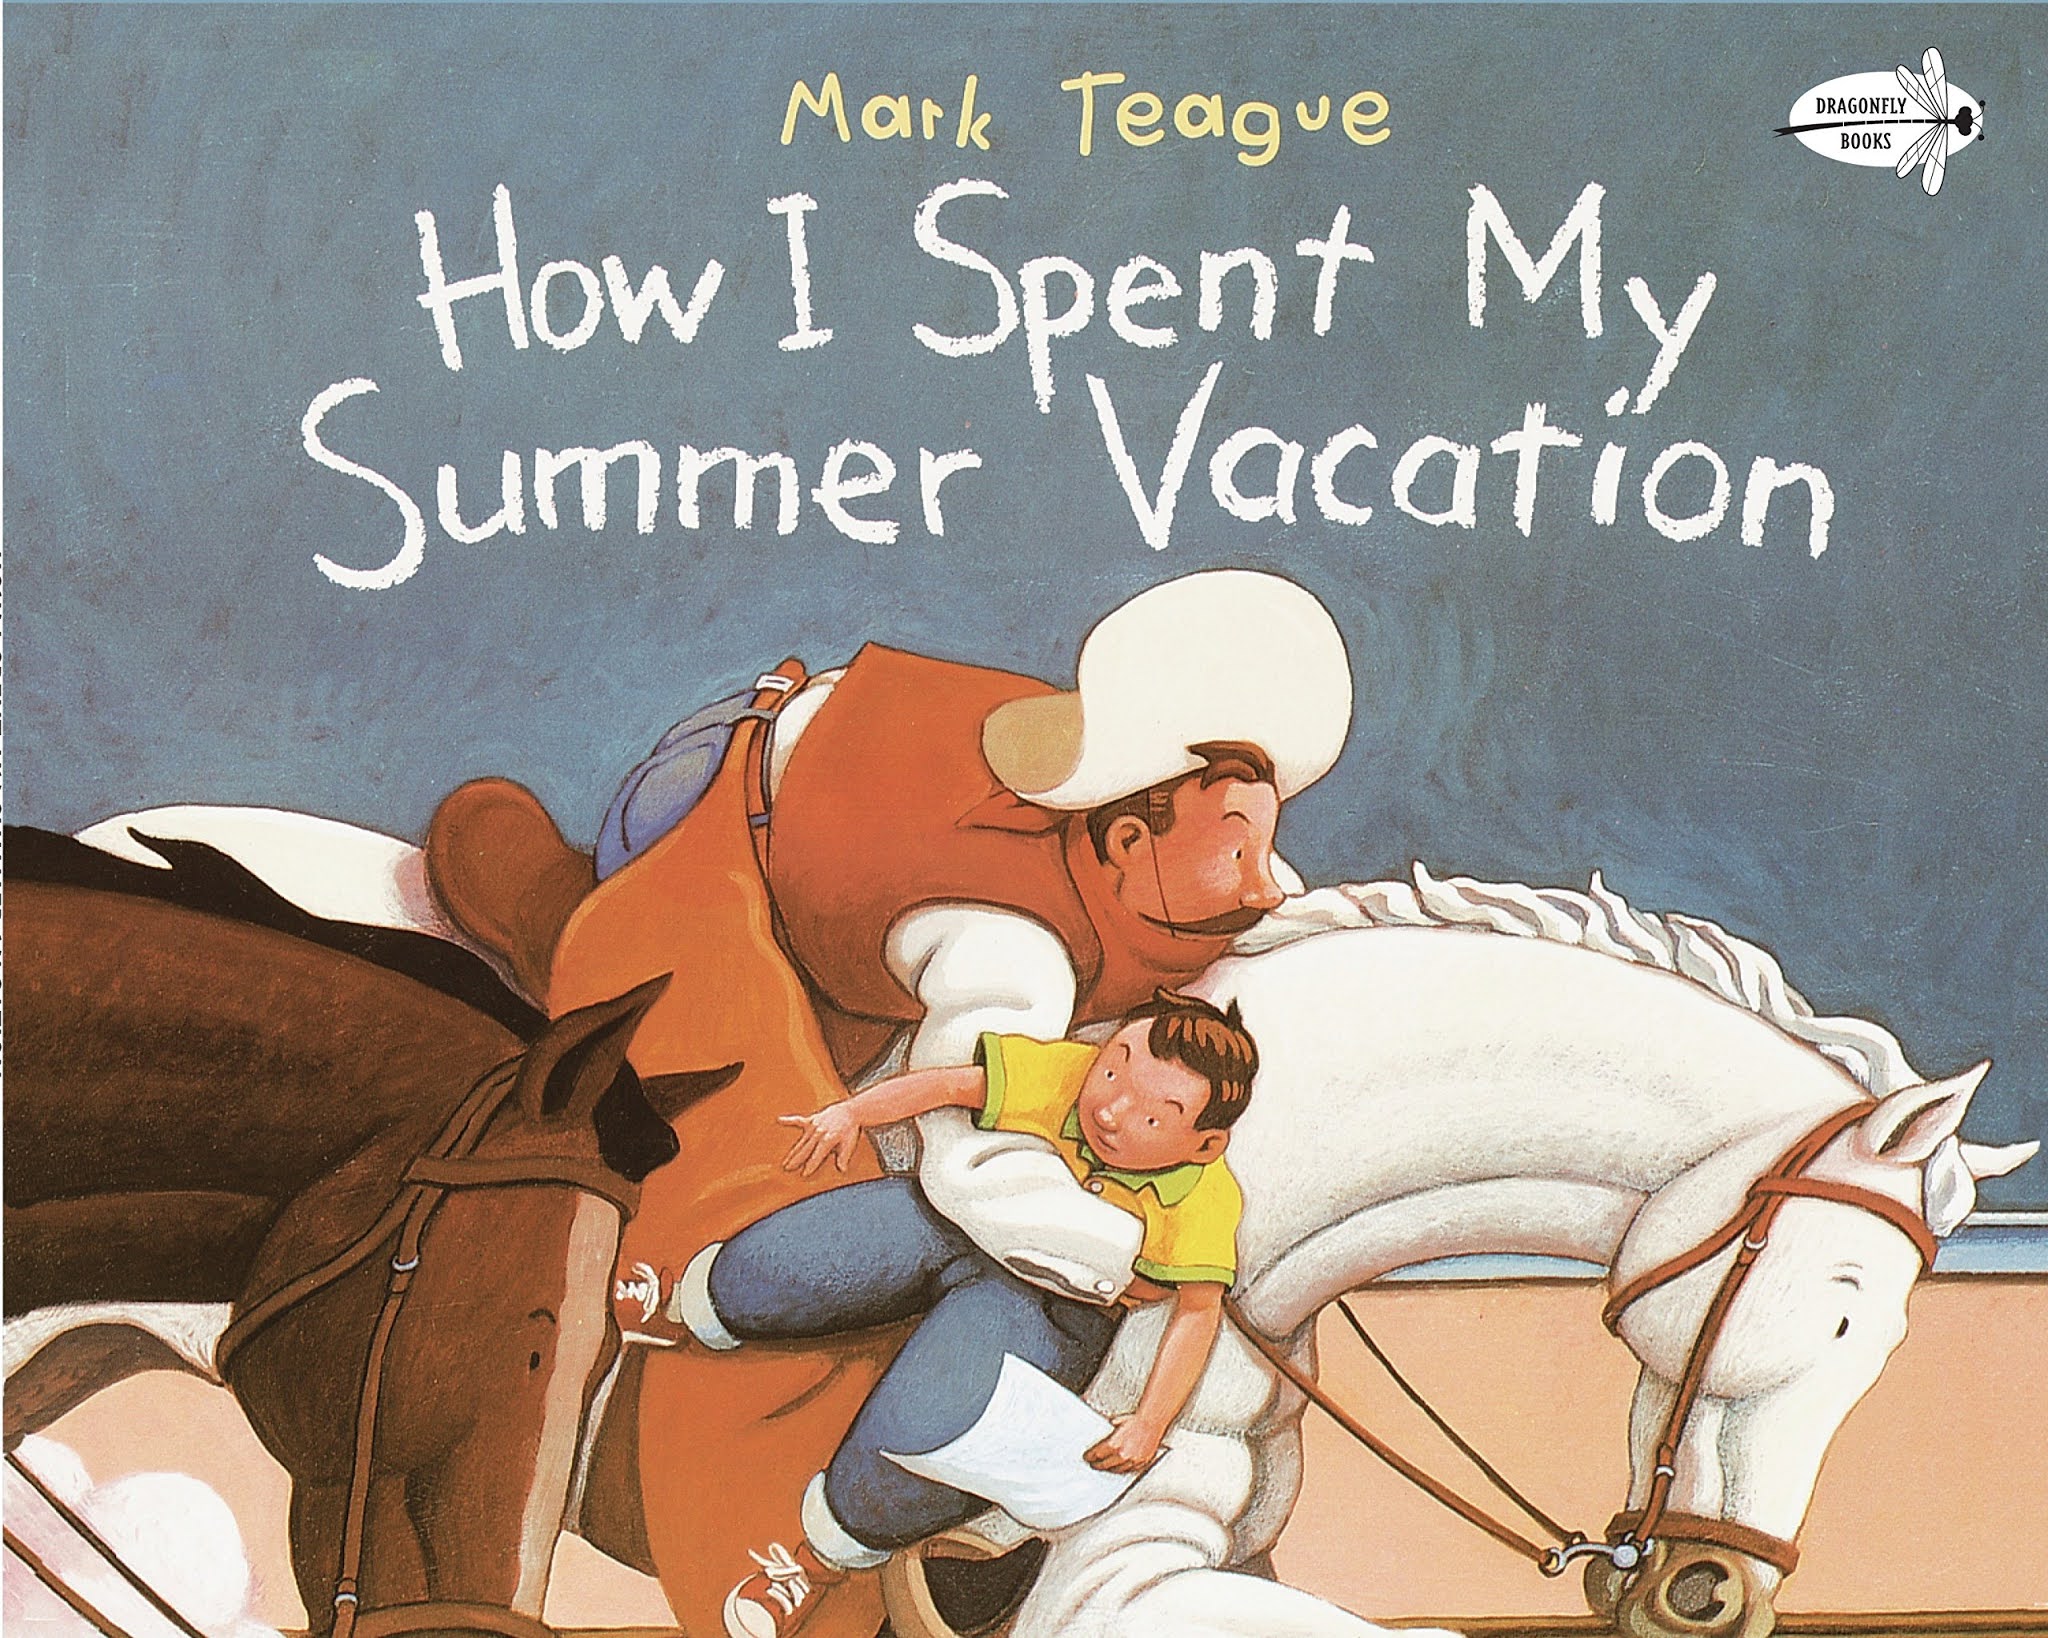 My summer book. How i spent my Summer vacation by Mark Teague. My Summer vacation book. I spent my vacation).